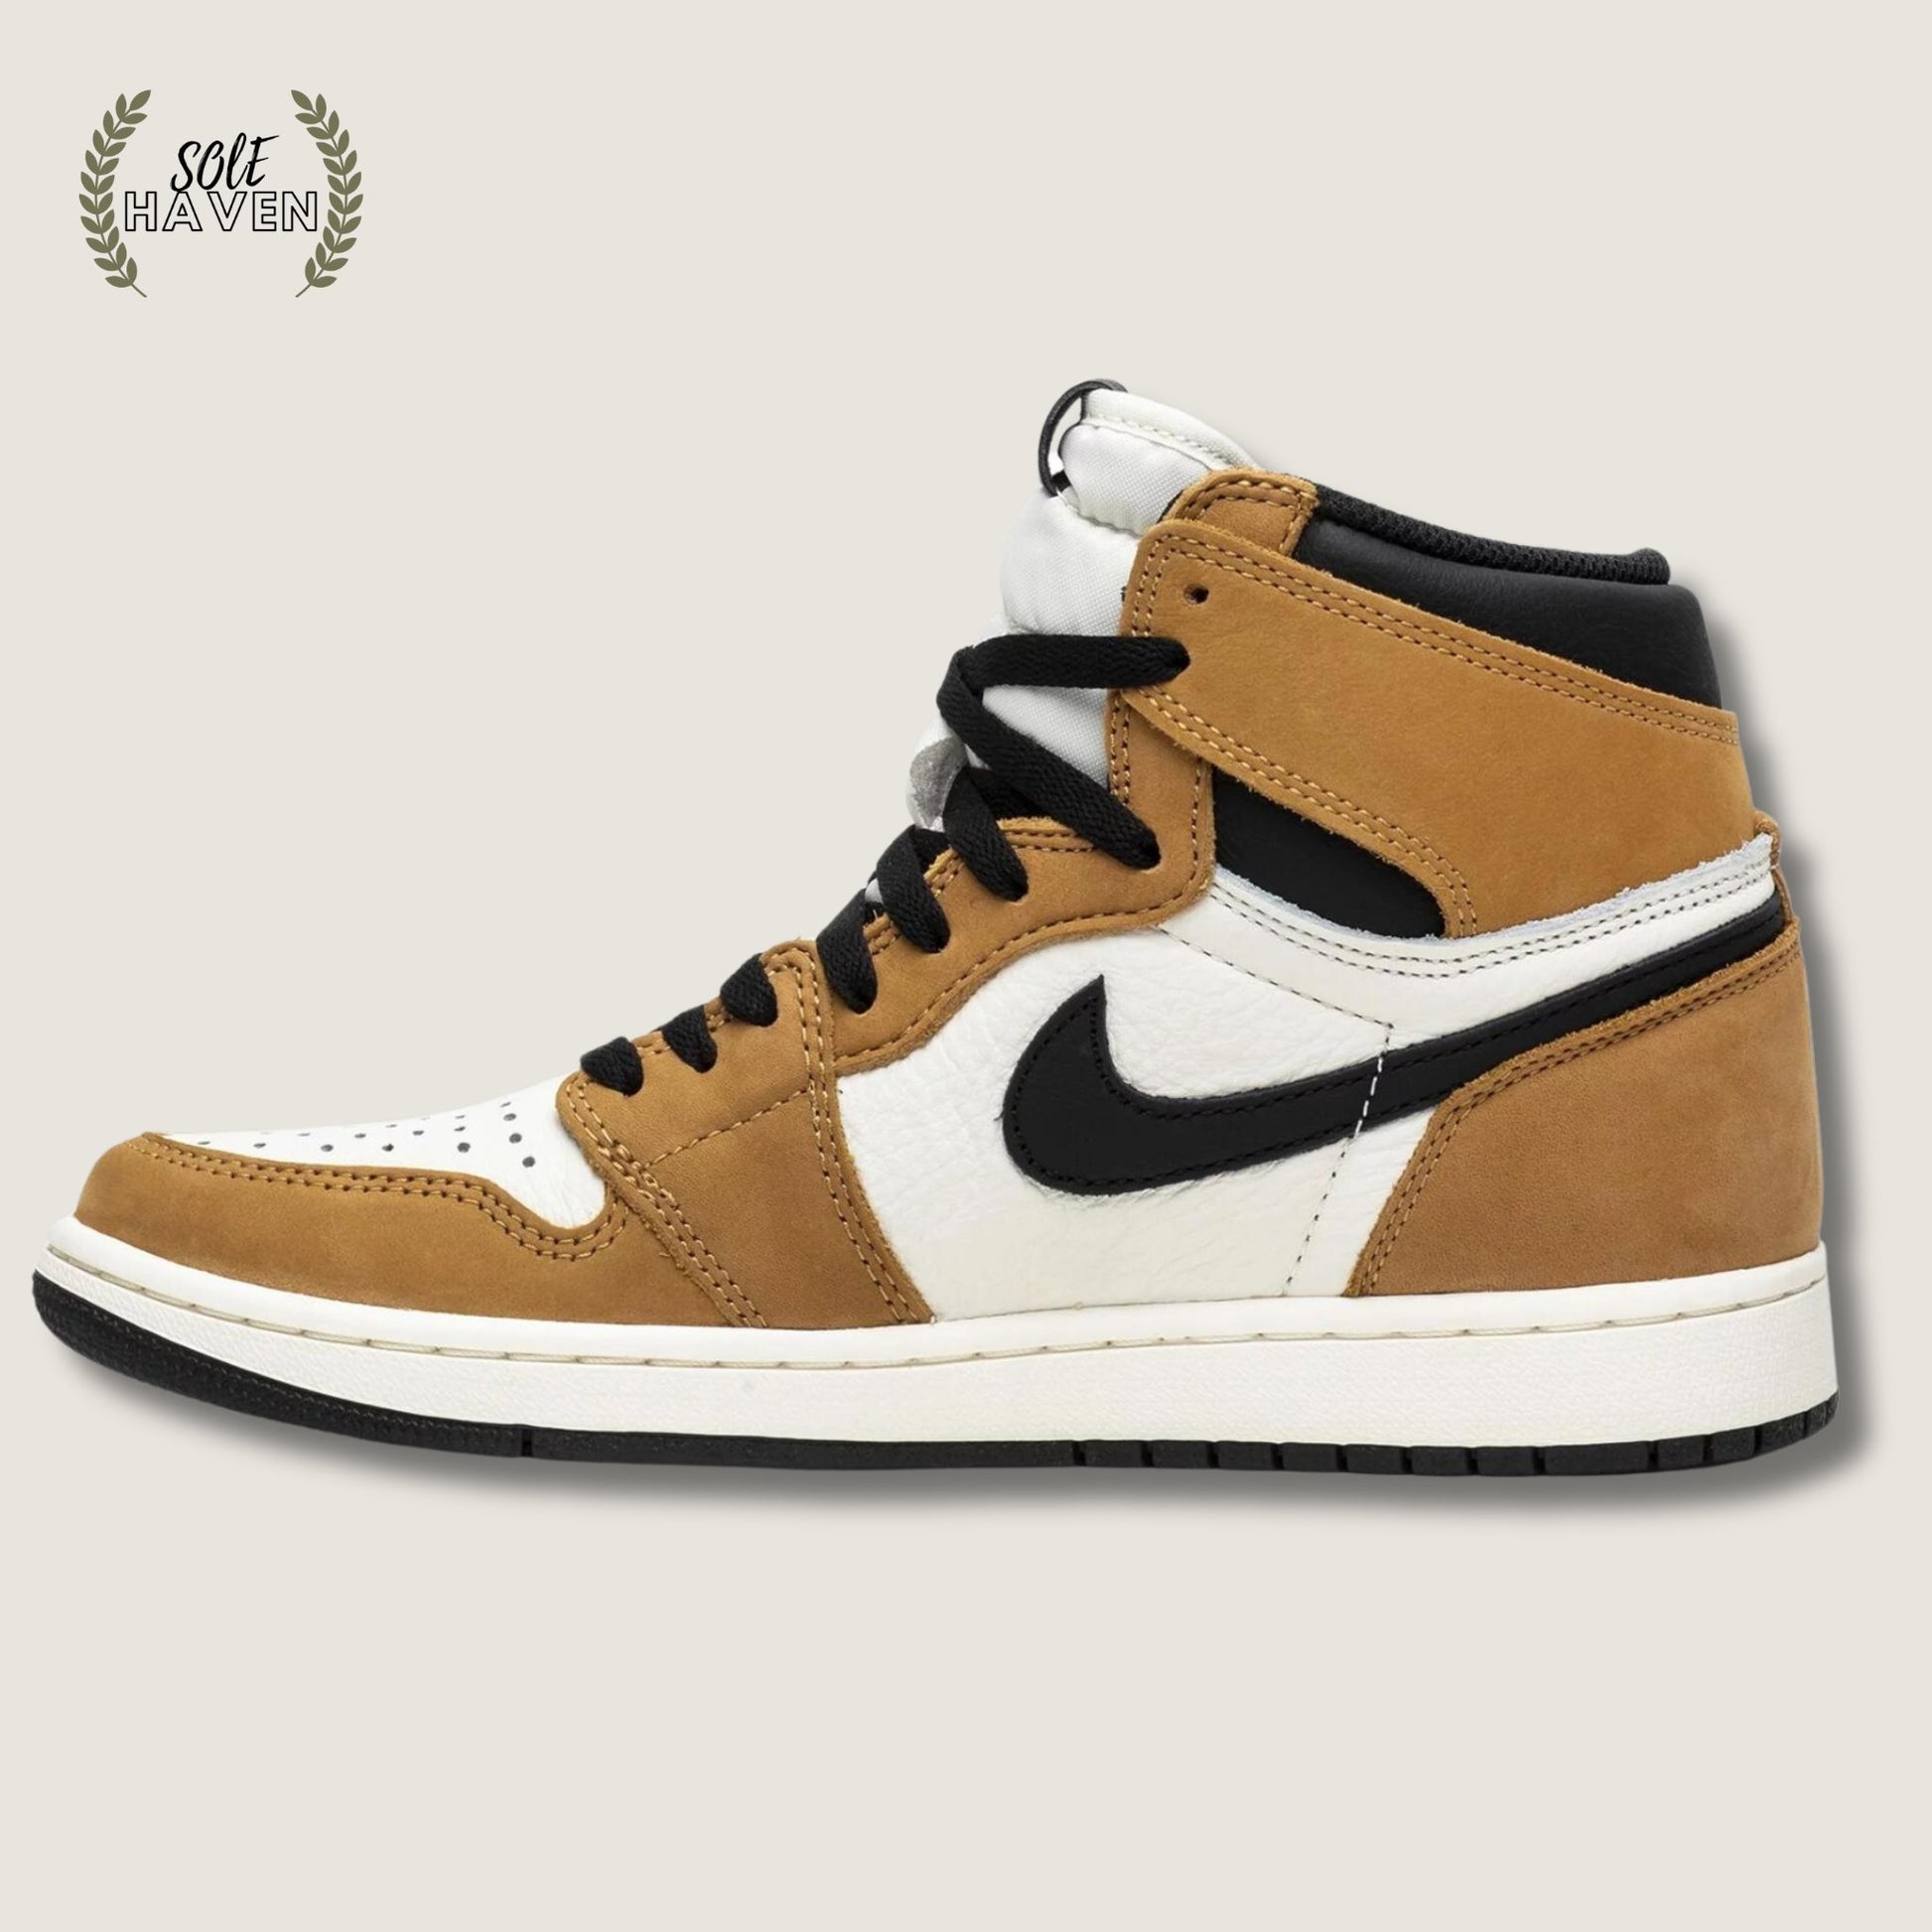 Air Jordan 1 High OG "Rookie of the Year" - Sole HavenShoesNike